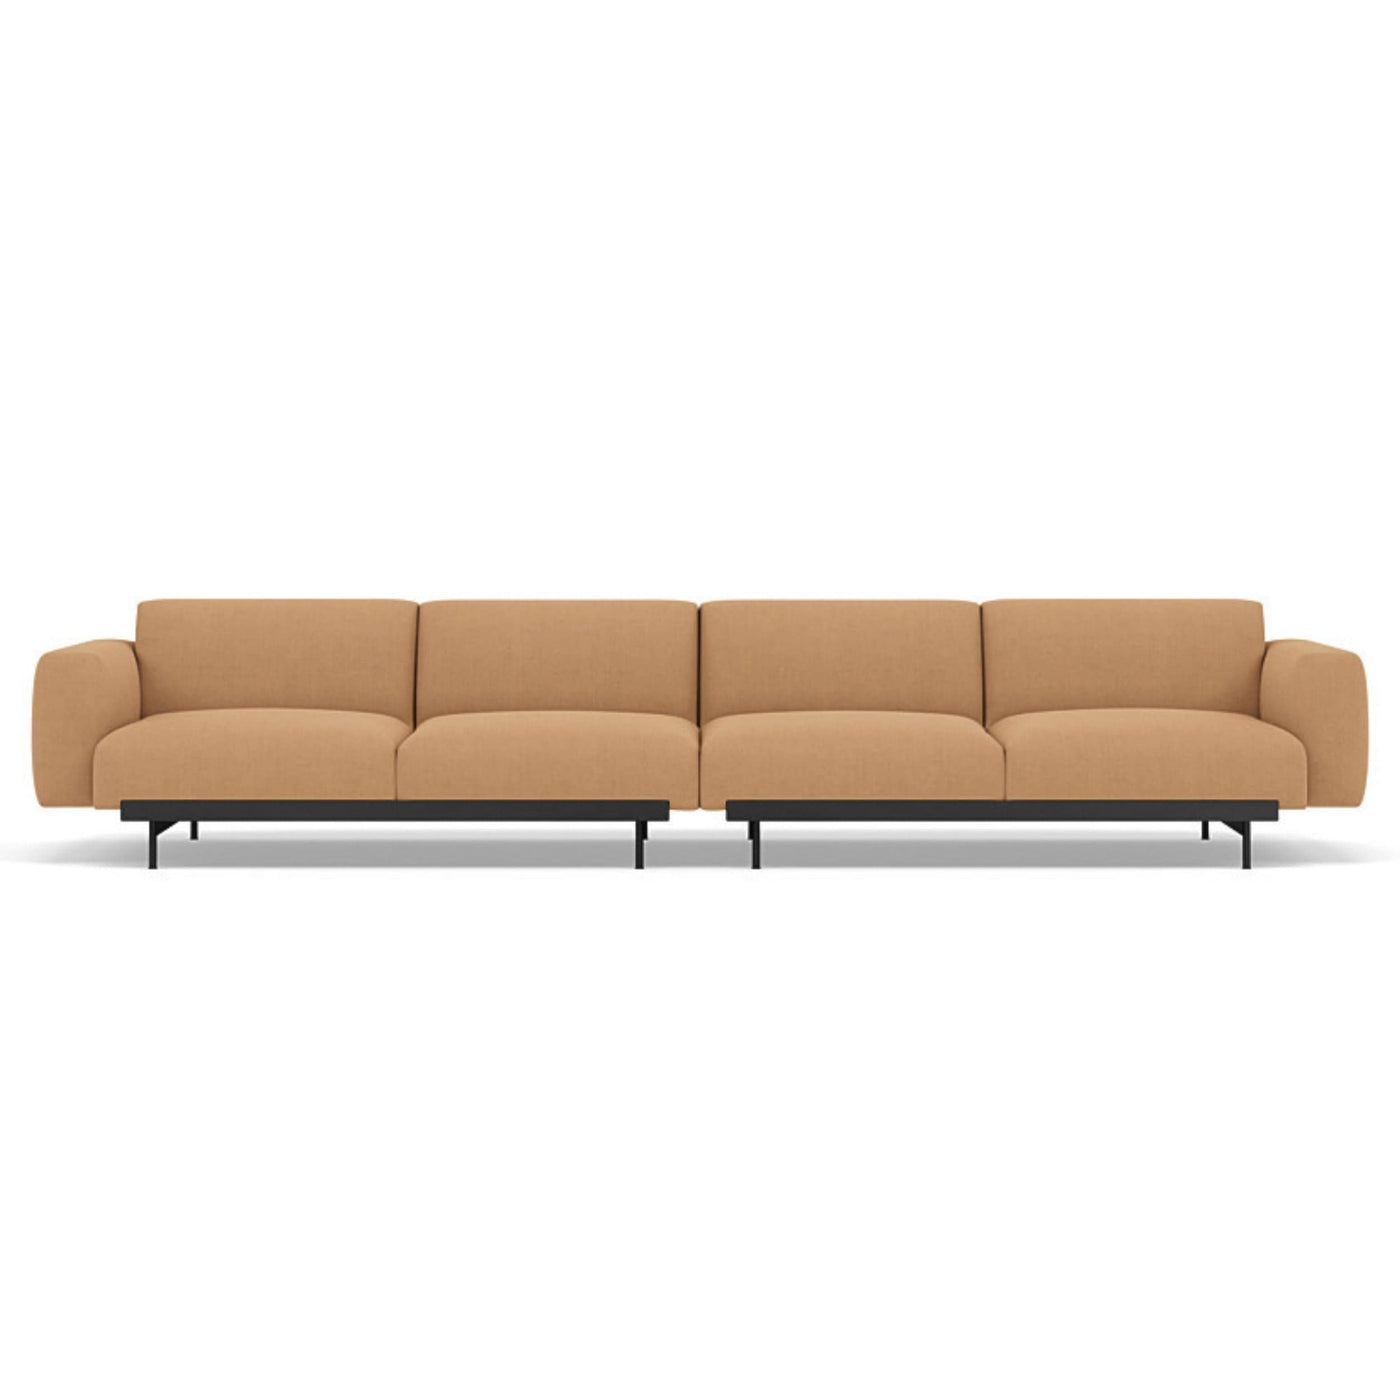 Muuto In Situ Modular 4 Seater Sofa configuration 1 in fiord 451. Made to order from someday designs. #colour_fiord-451